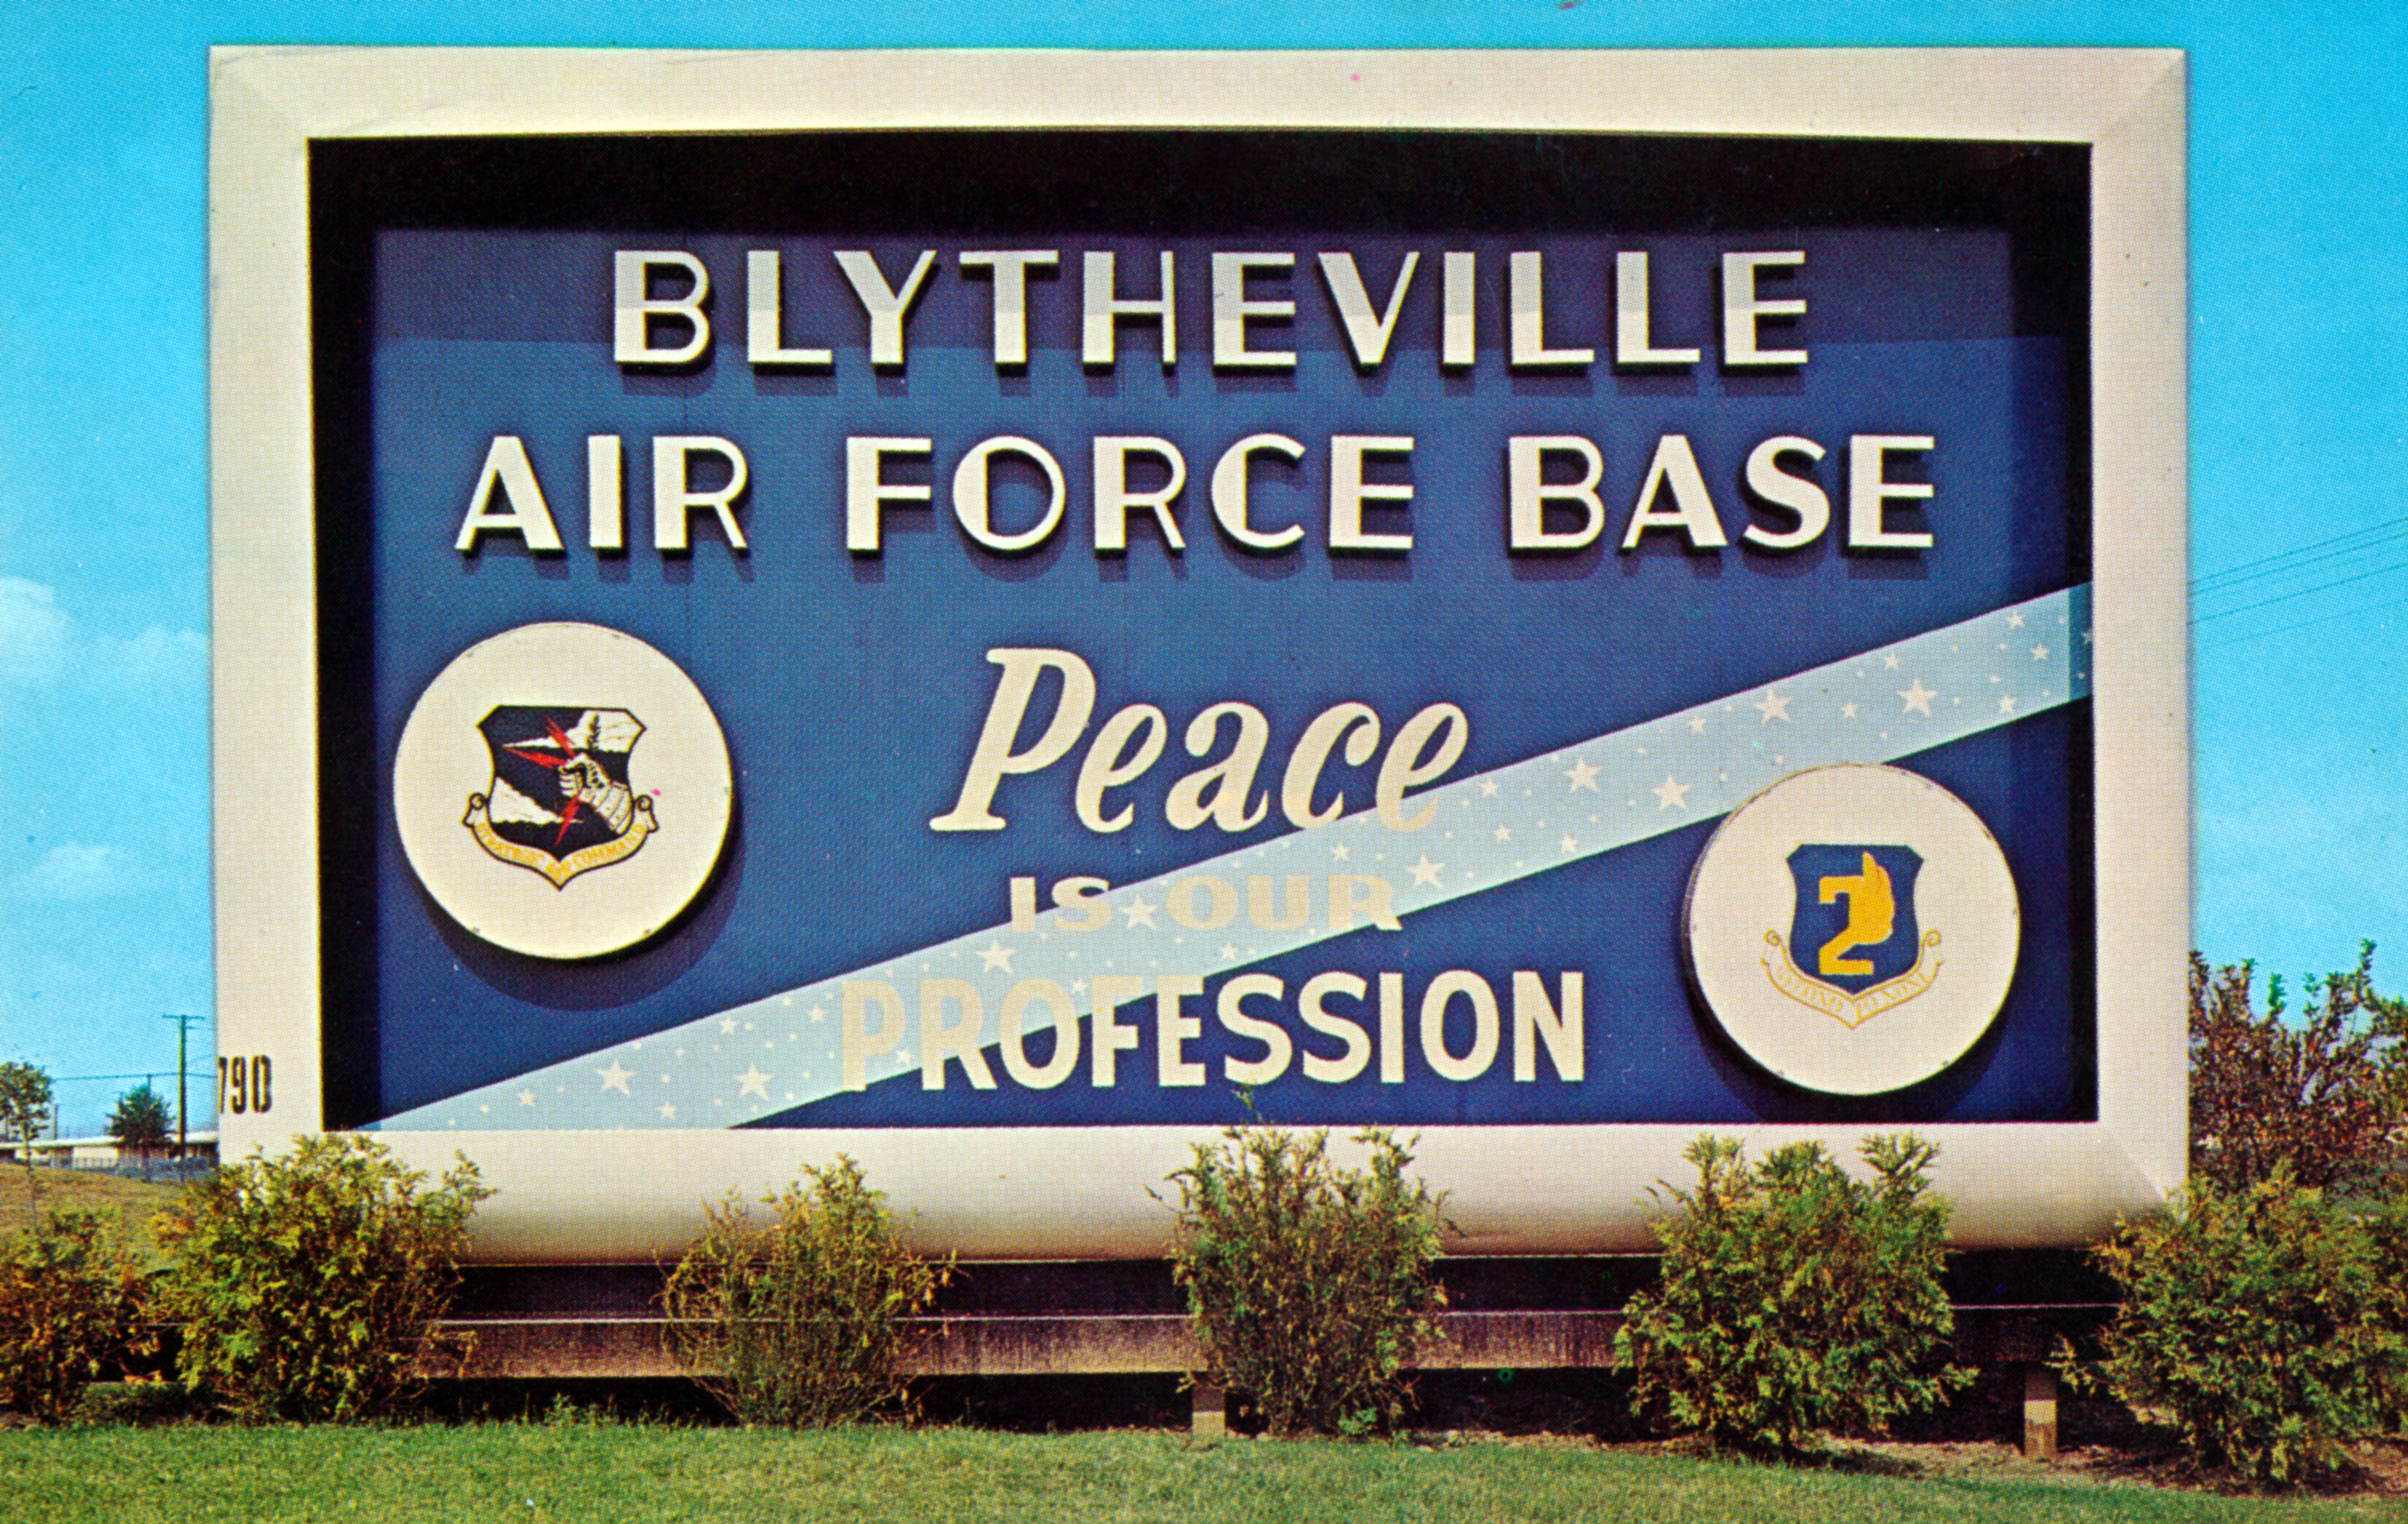 Blytheville Air Force Base Gate sign from 1972